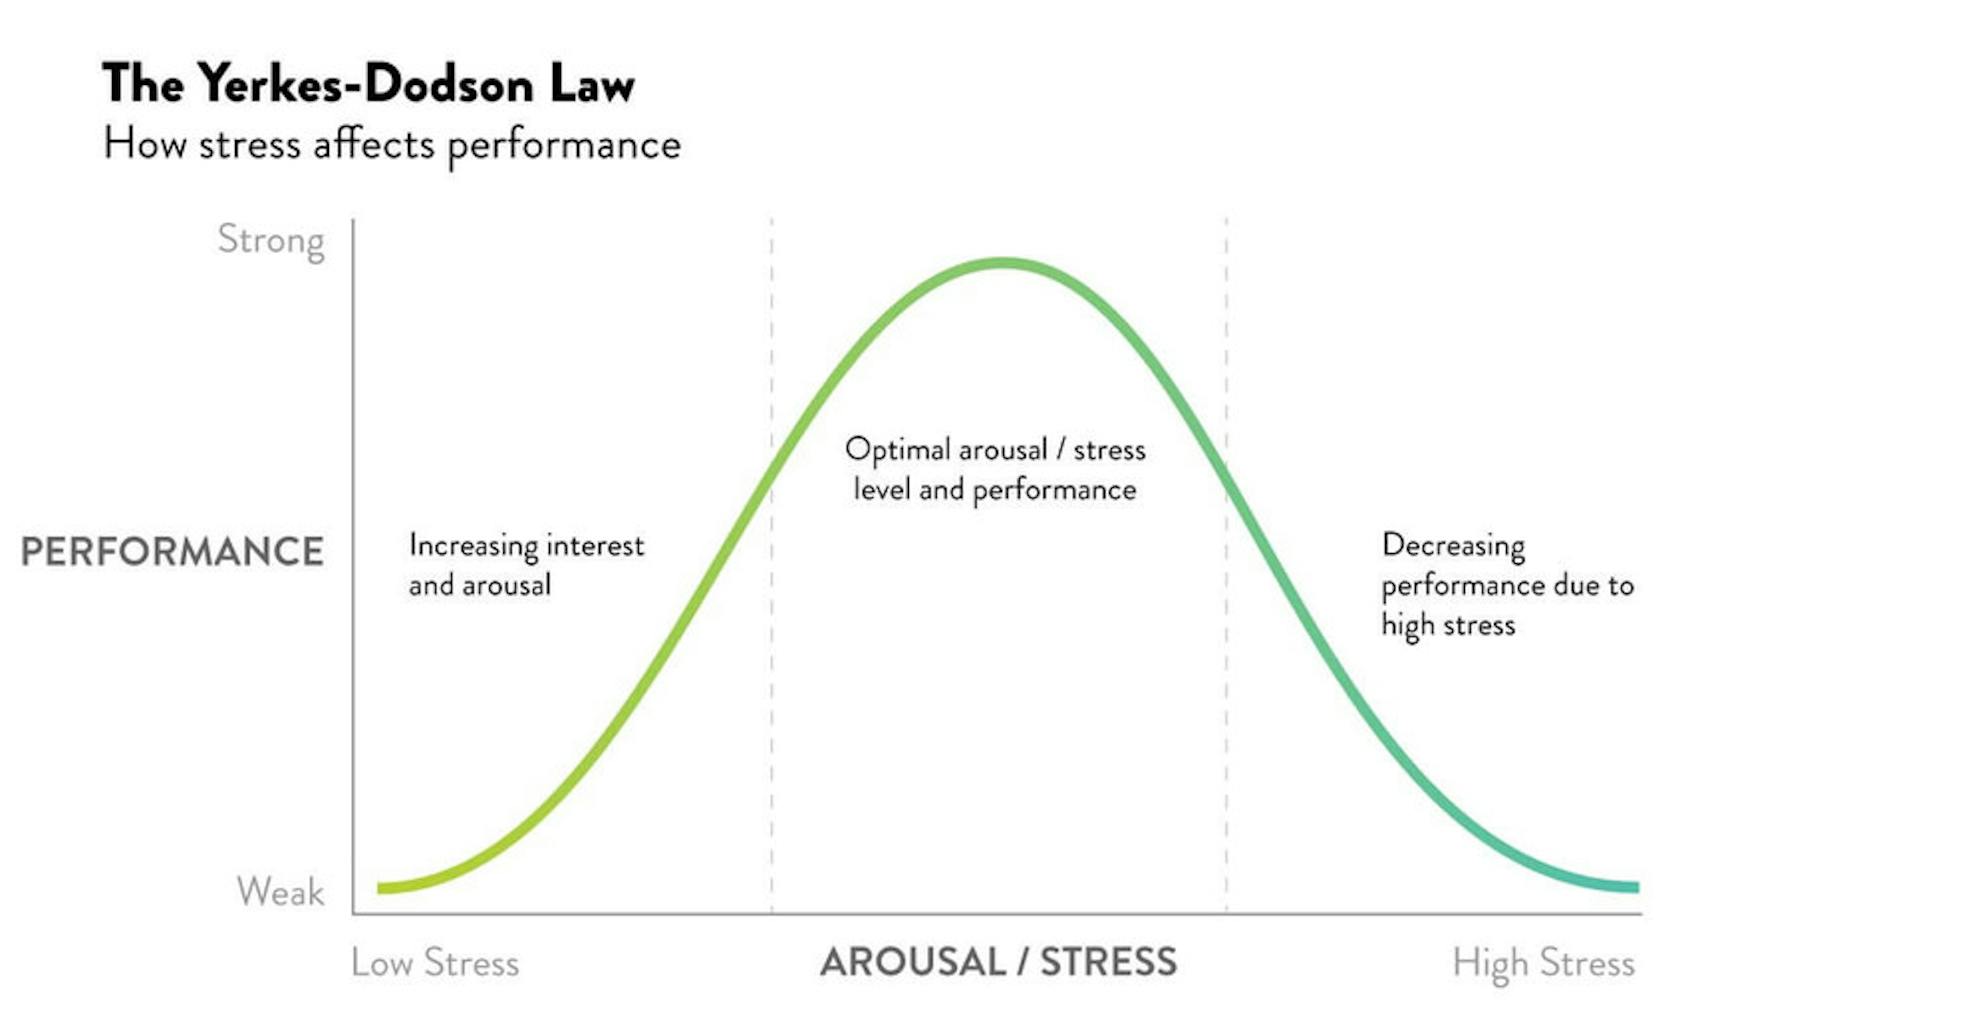 Yerkes-Dodson Law graph showing how stress affects performance